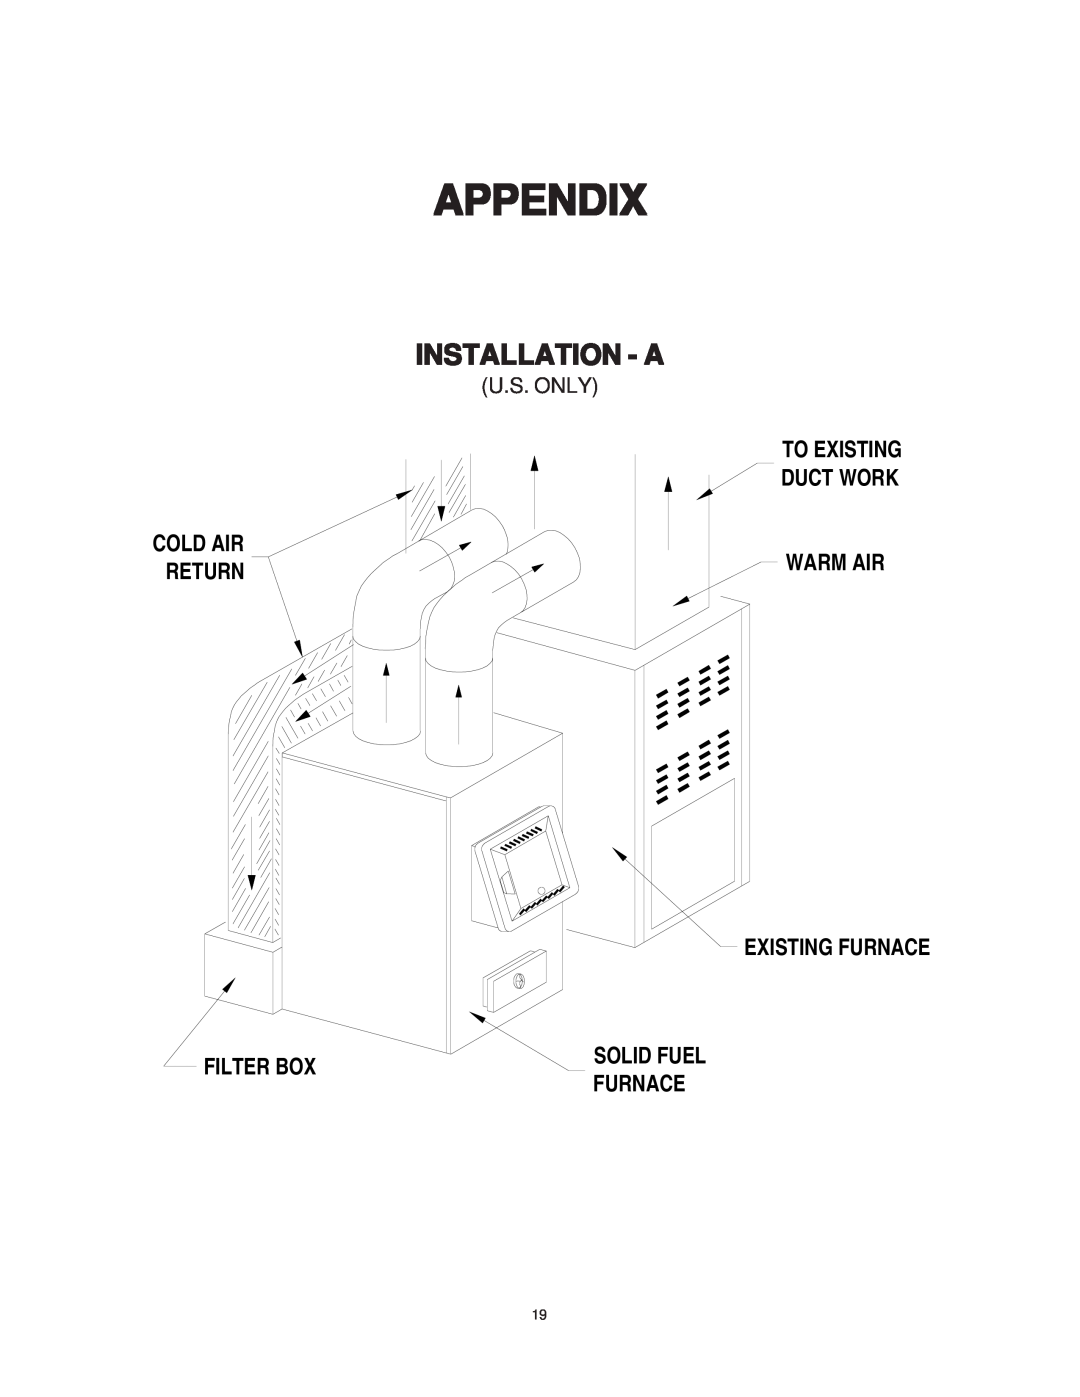 United States Stove 1537M owner manual Appendix, Installation - A, Cold Air Return Filter Box, Solid Fuel Furnace 